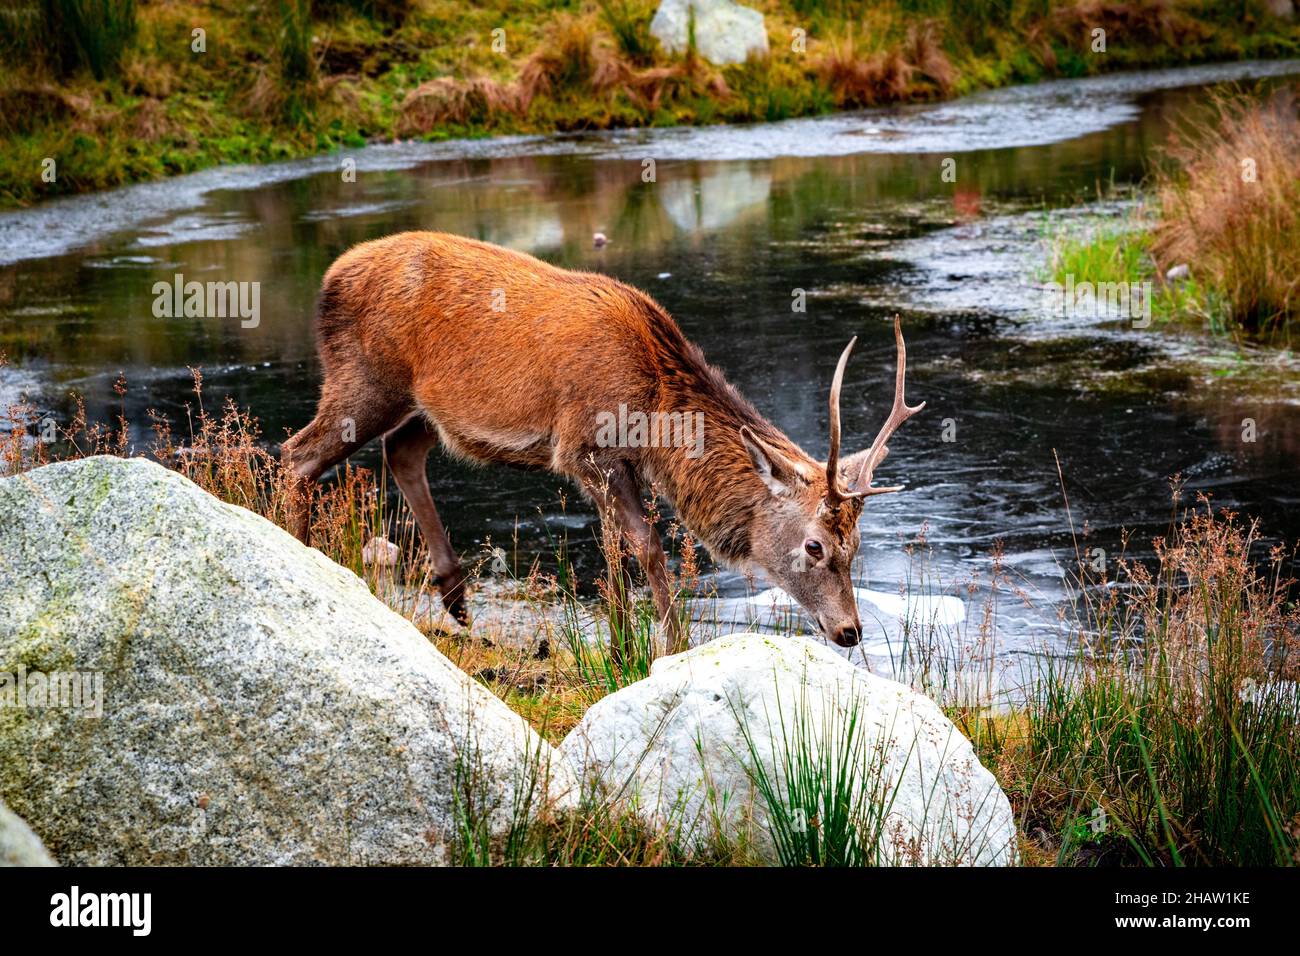 Closeup of a red stag near a pond surrounded by rocks and greenery in Glencoe, Scotland Stock Photo